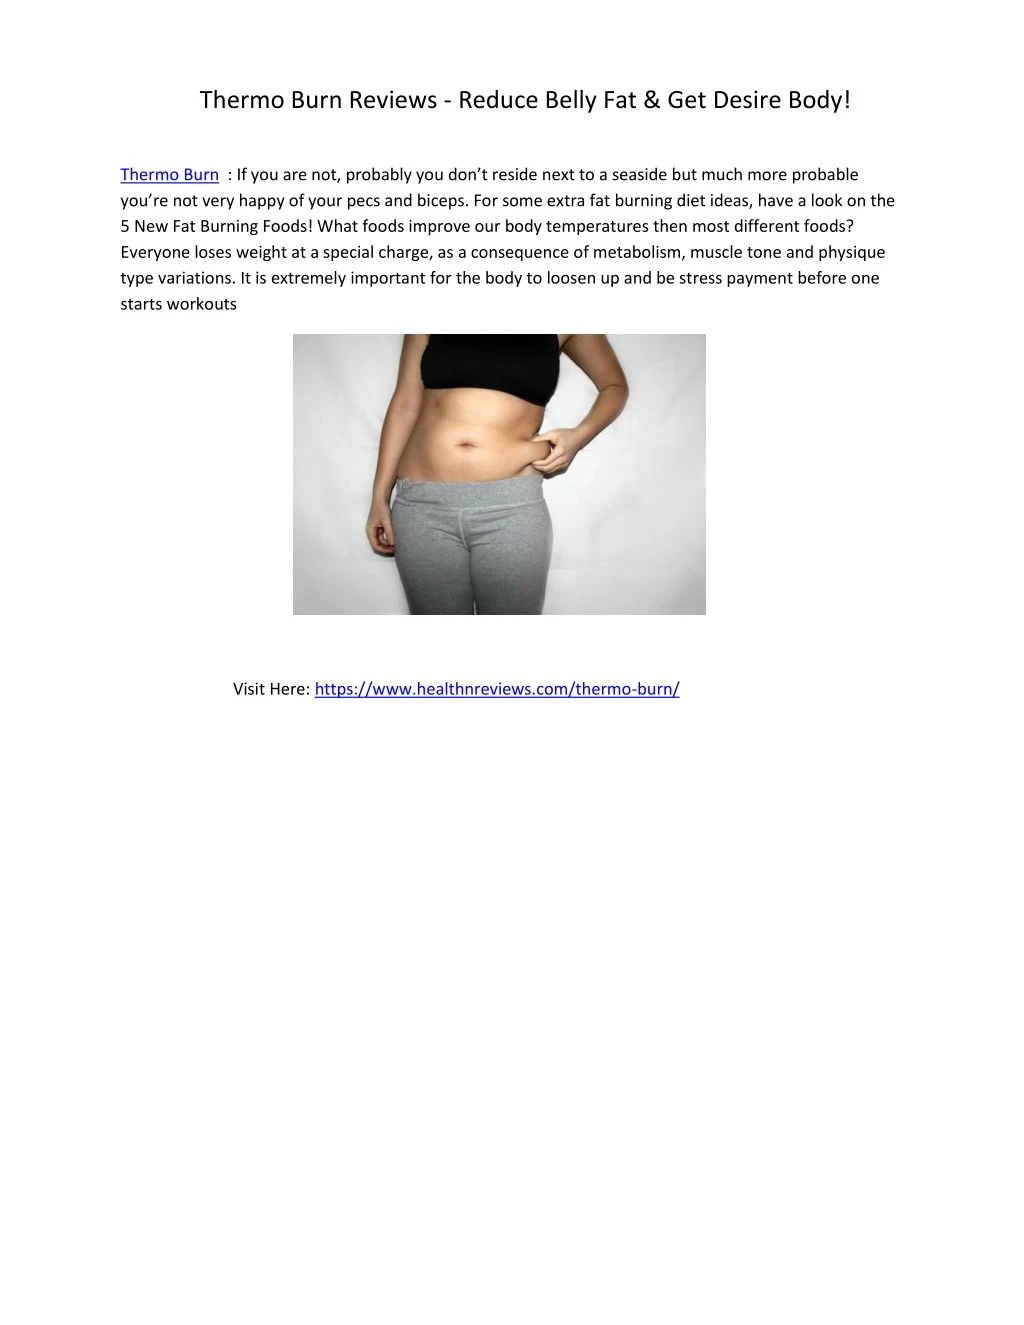 thermo burn reviews reduce belly fat get desire